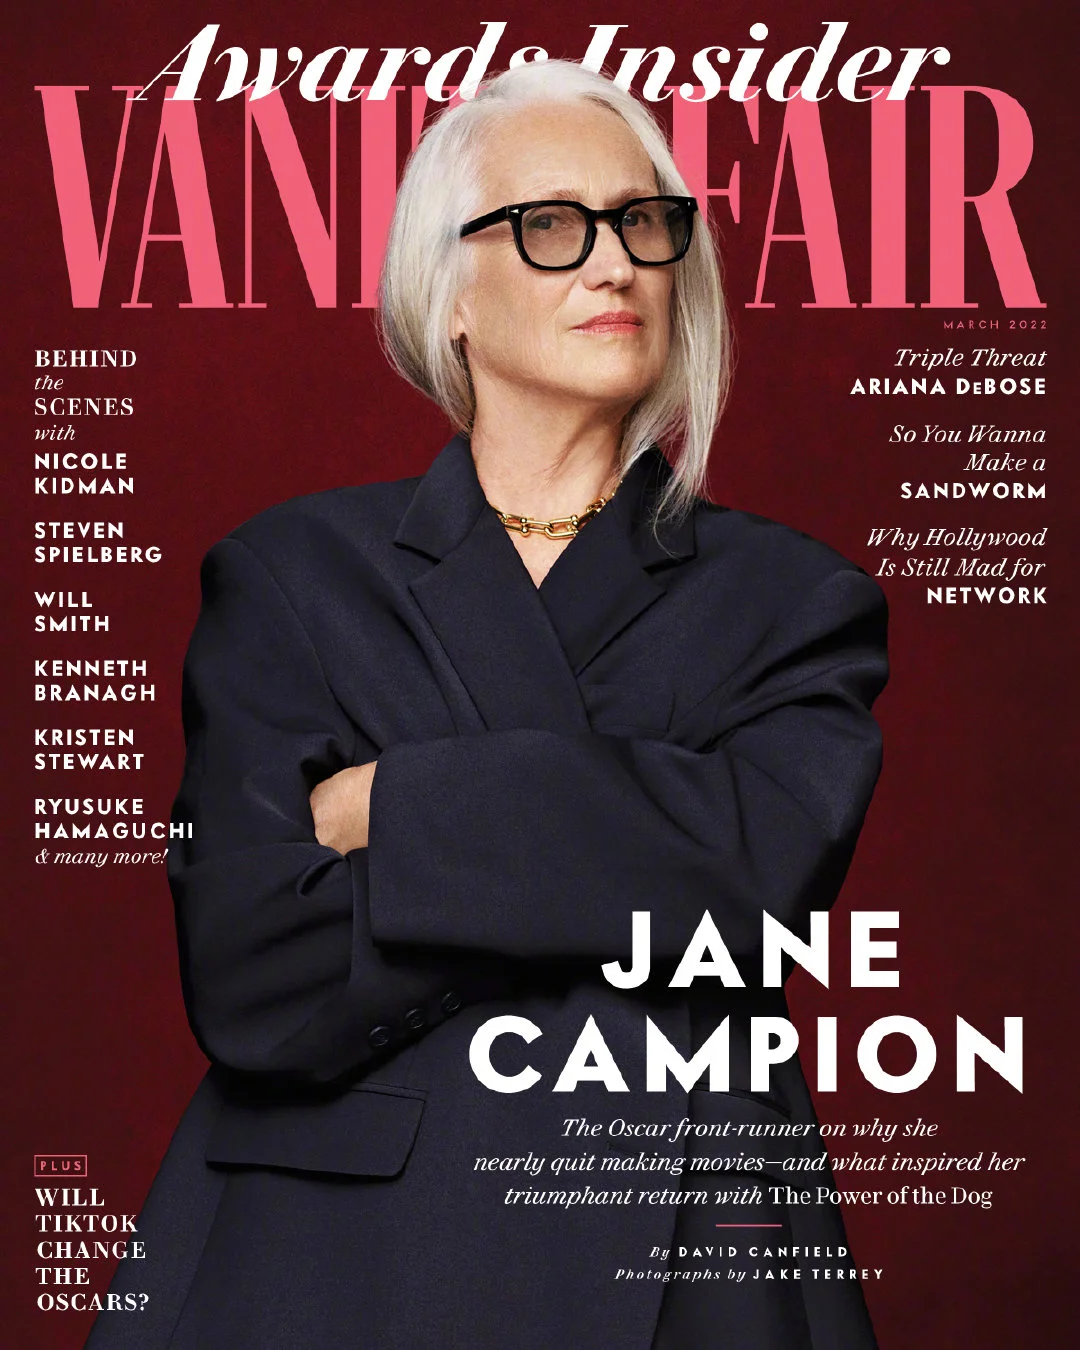 Jane Campion appeared in the "Vanity Fair" Oscar season special issue ​​​